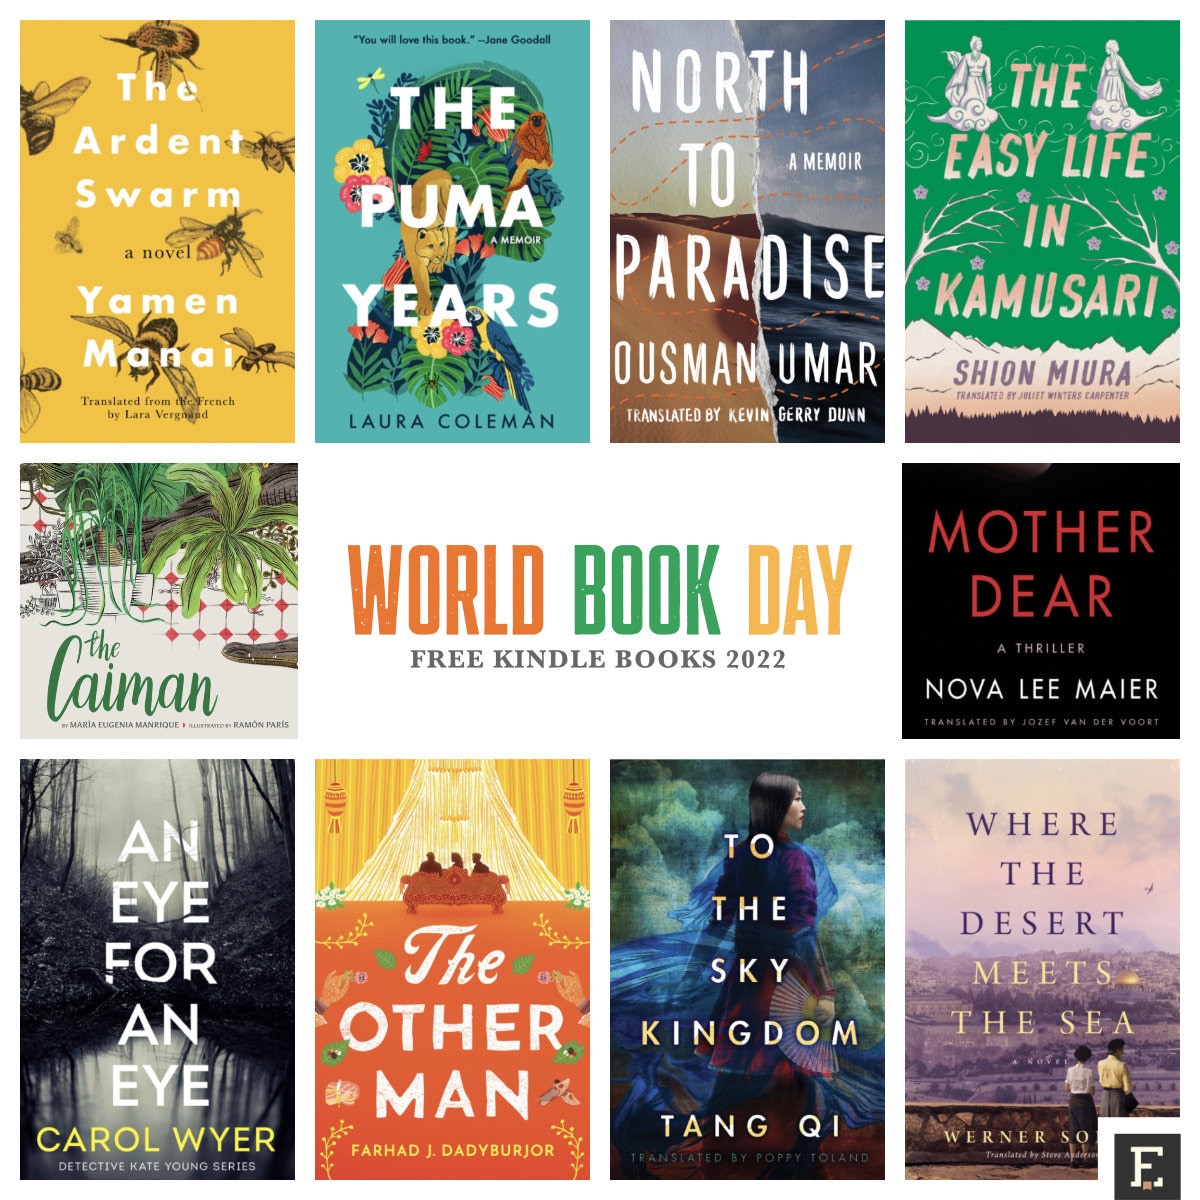 These 10 Kindle books are free to download for World Book Day 2022